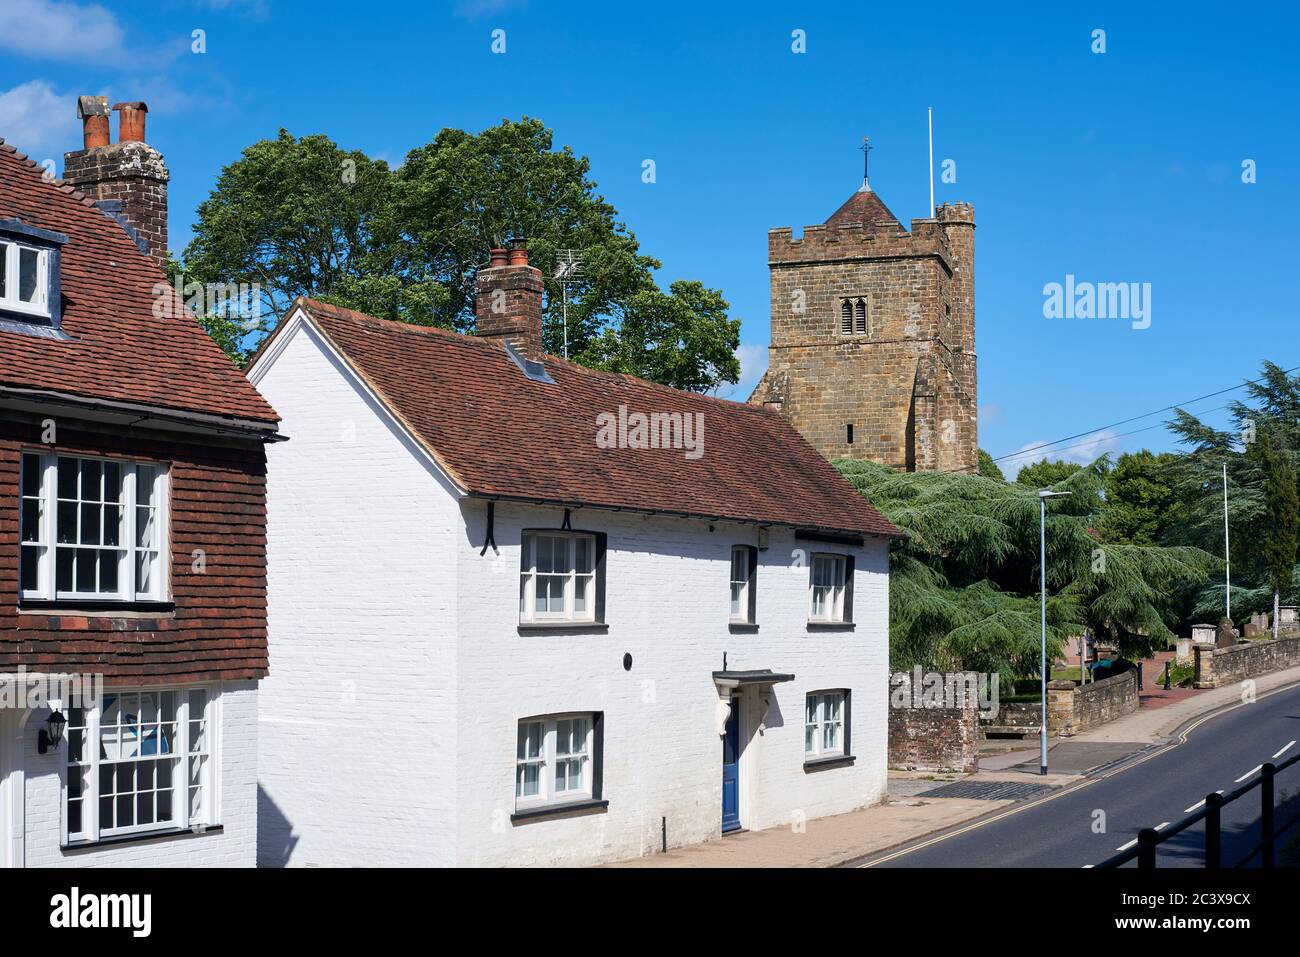 The High Street at Battle, East Sussex, Southern England, with cottages and the historic St Mary's church tower Stock Photo